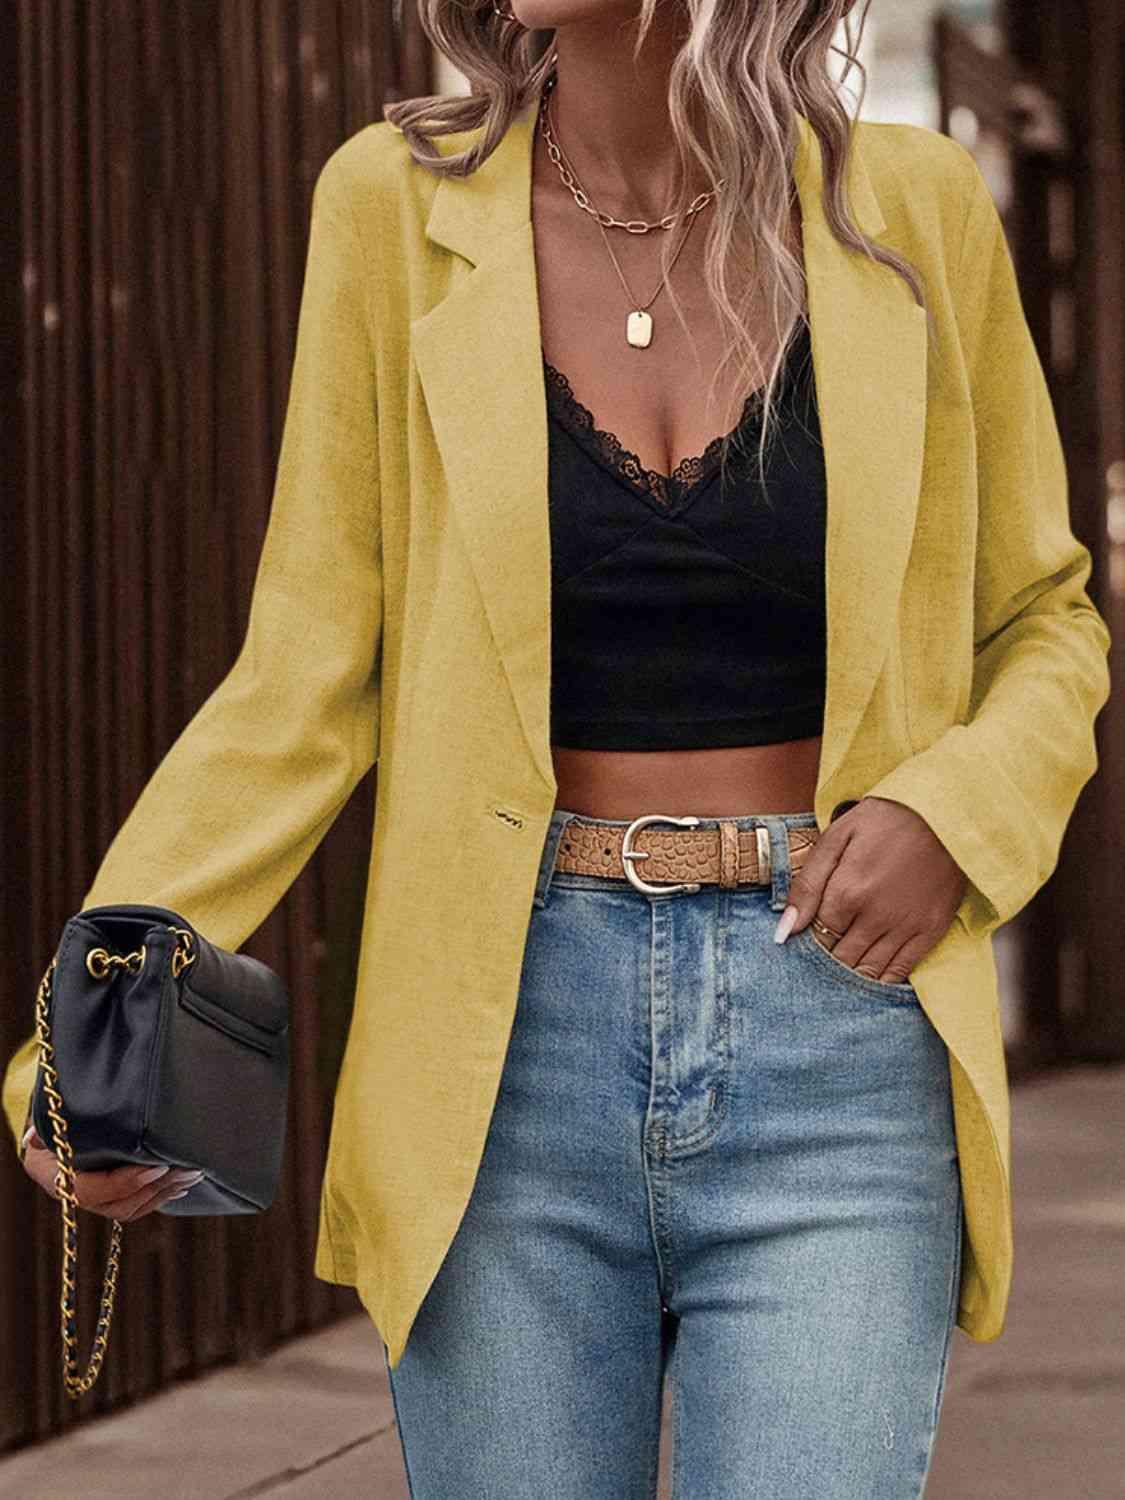 a woman wearing a yellow blazer and jeans